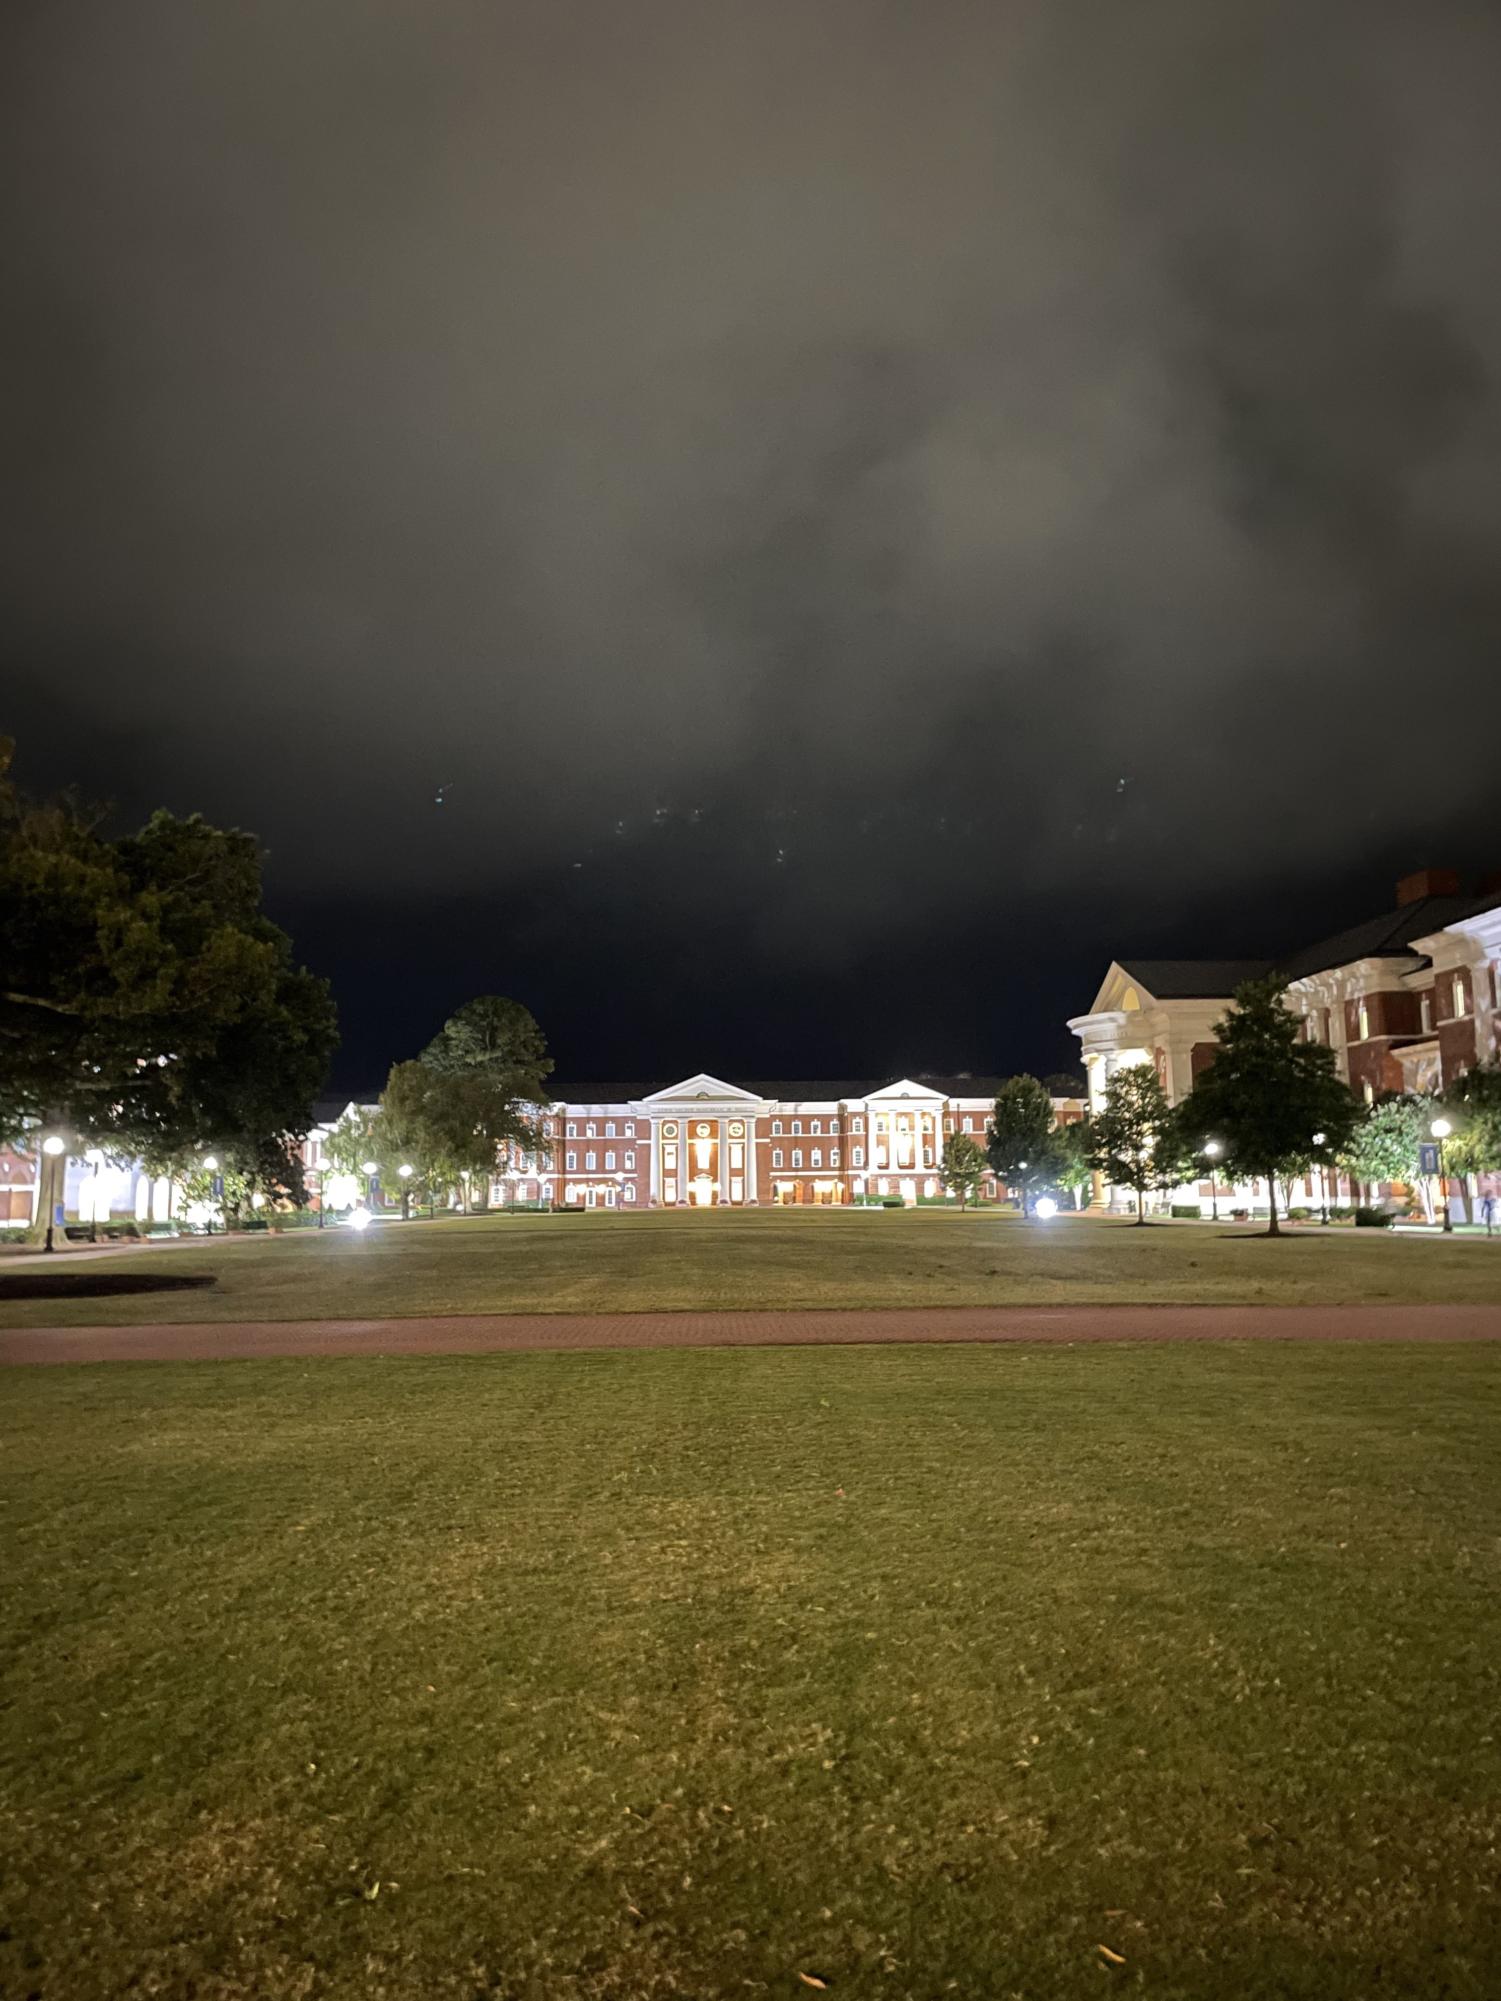 Photo of campus Friday night during the storm taken by Adrianna Cline/ The Captains Log